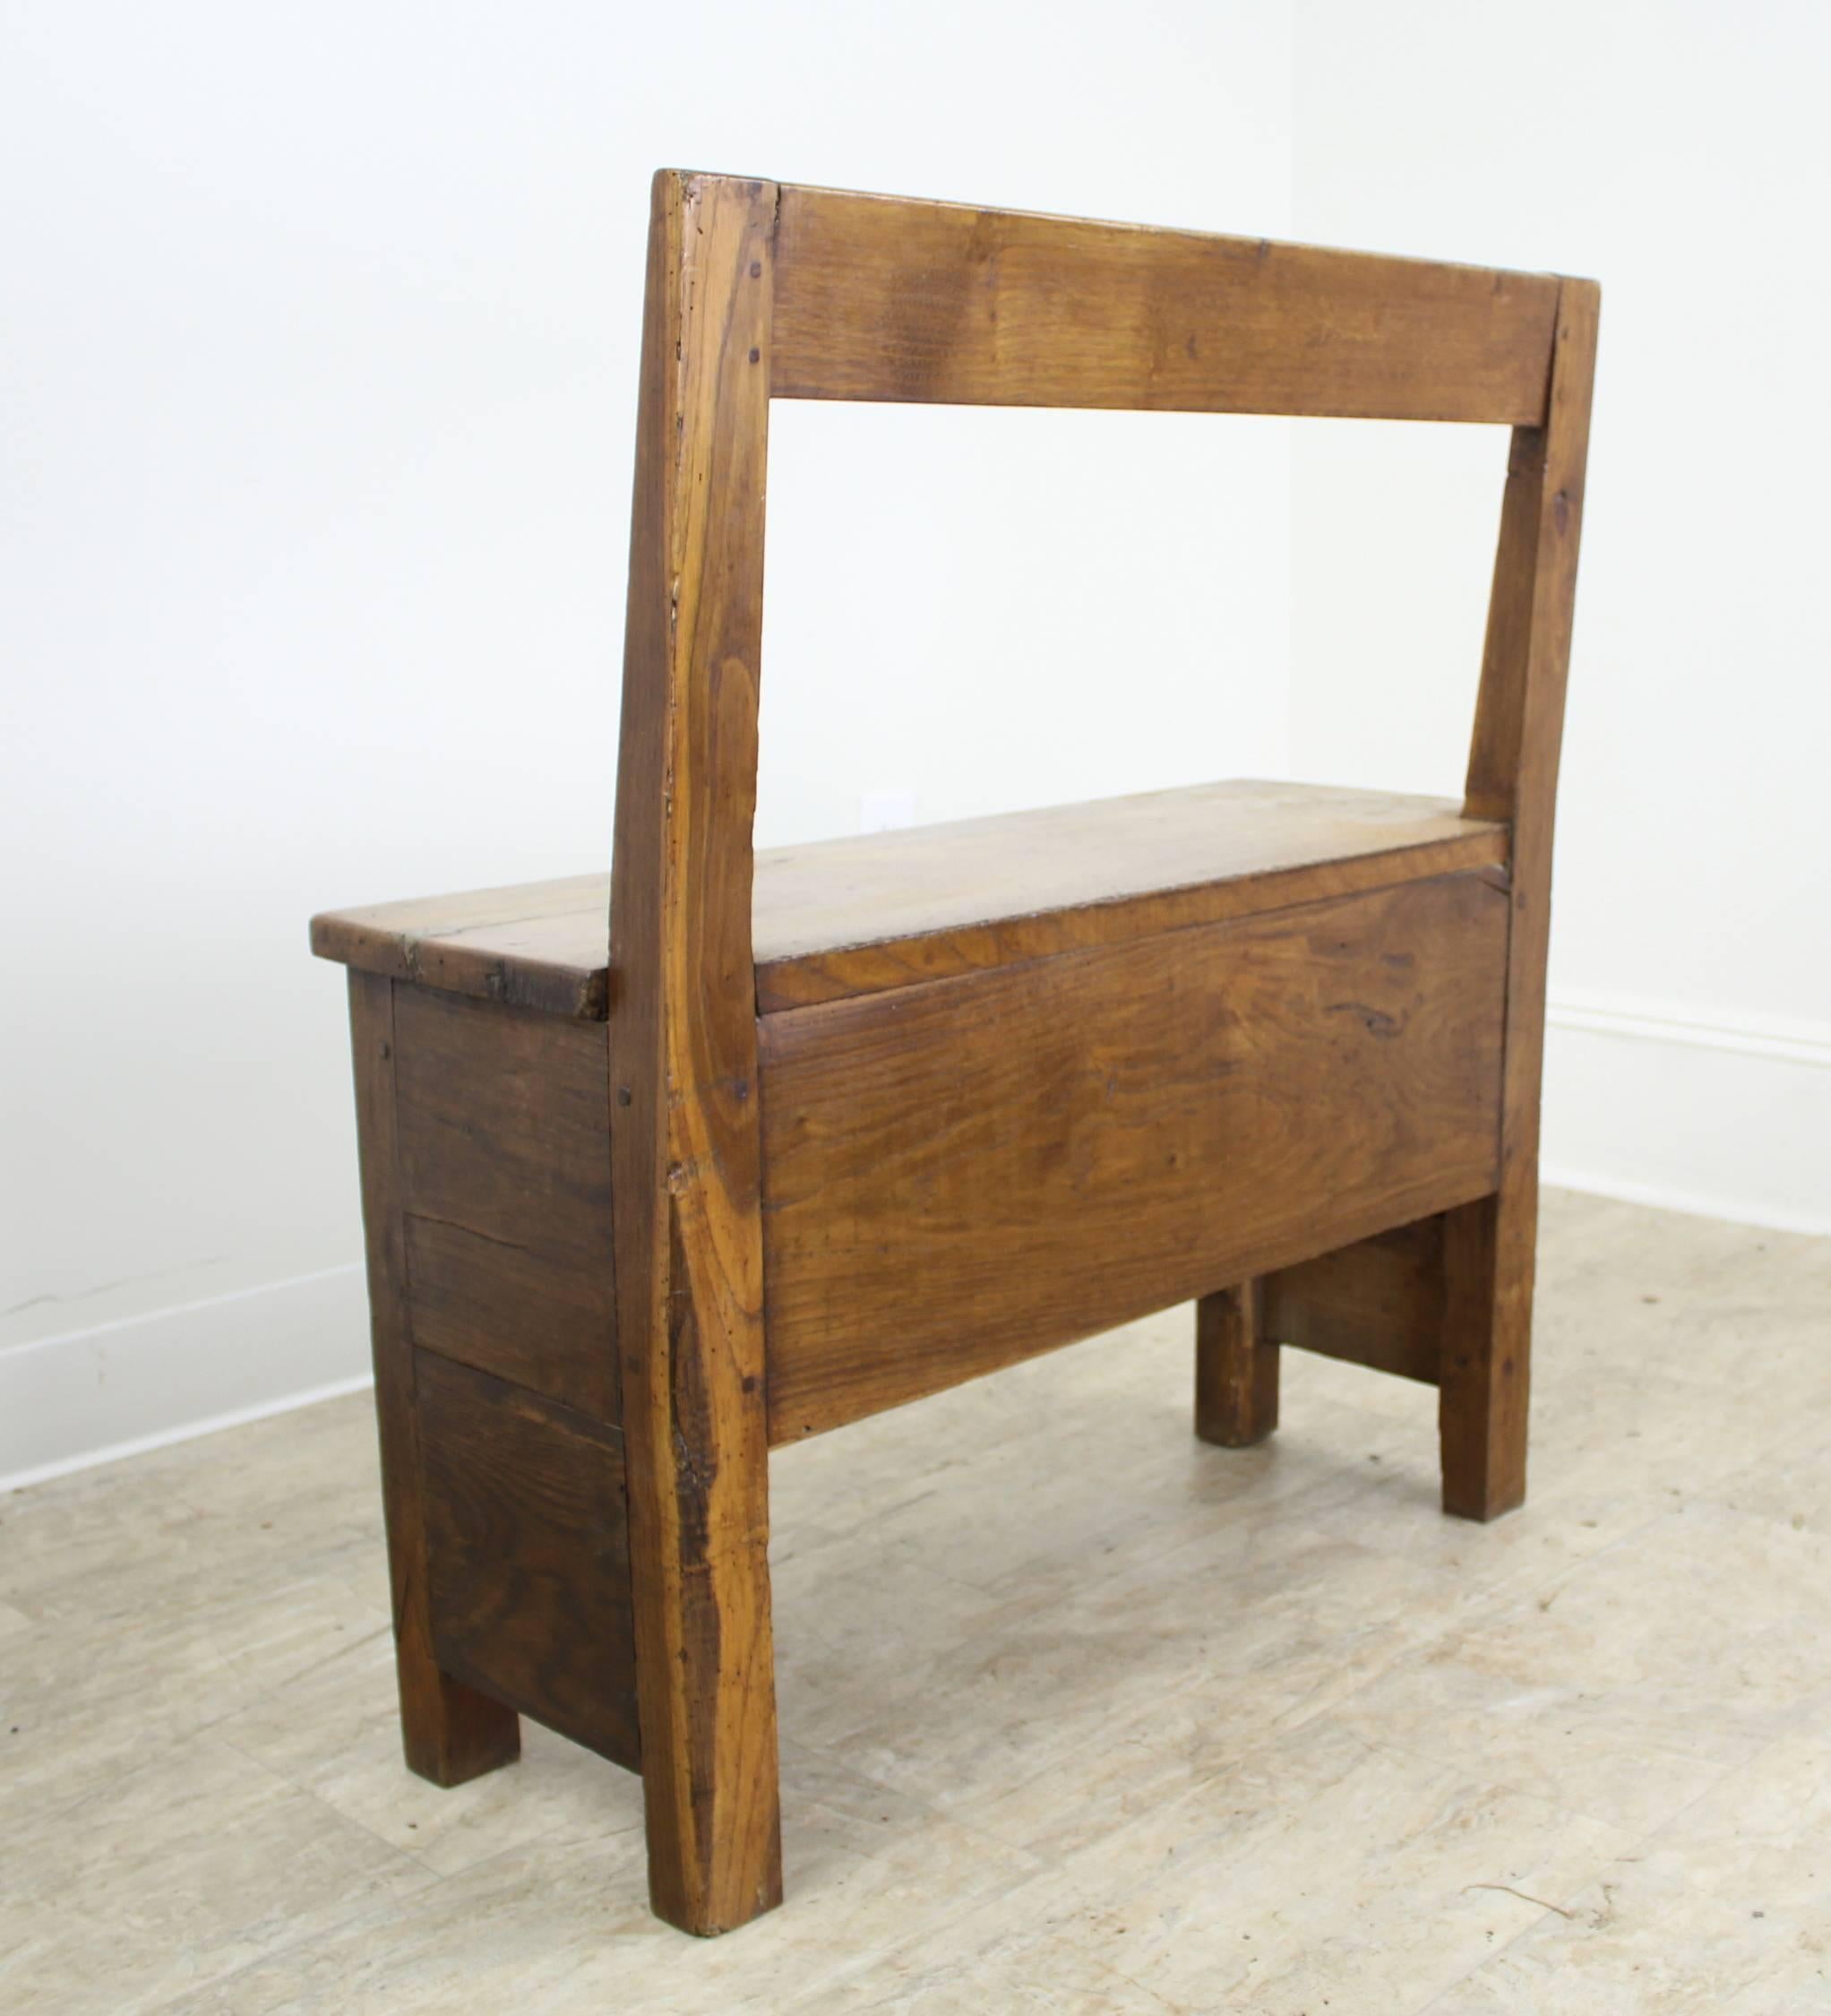 19th Century Antique Chestnut Seat with Small Drawer